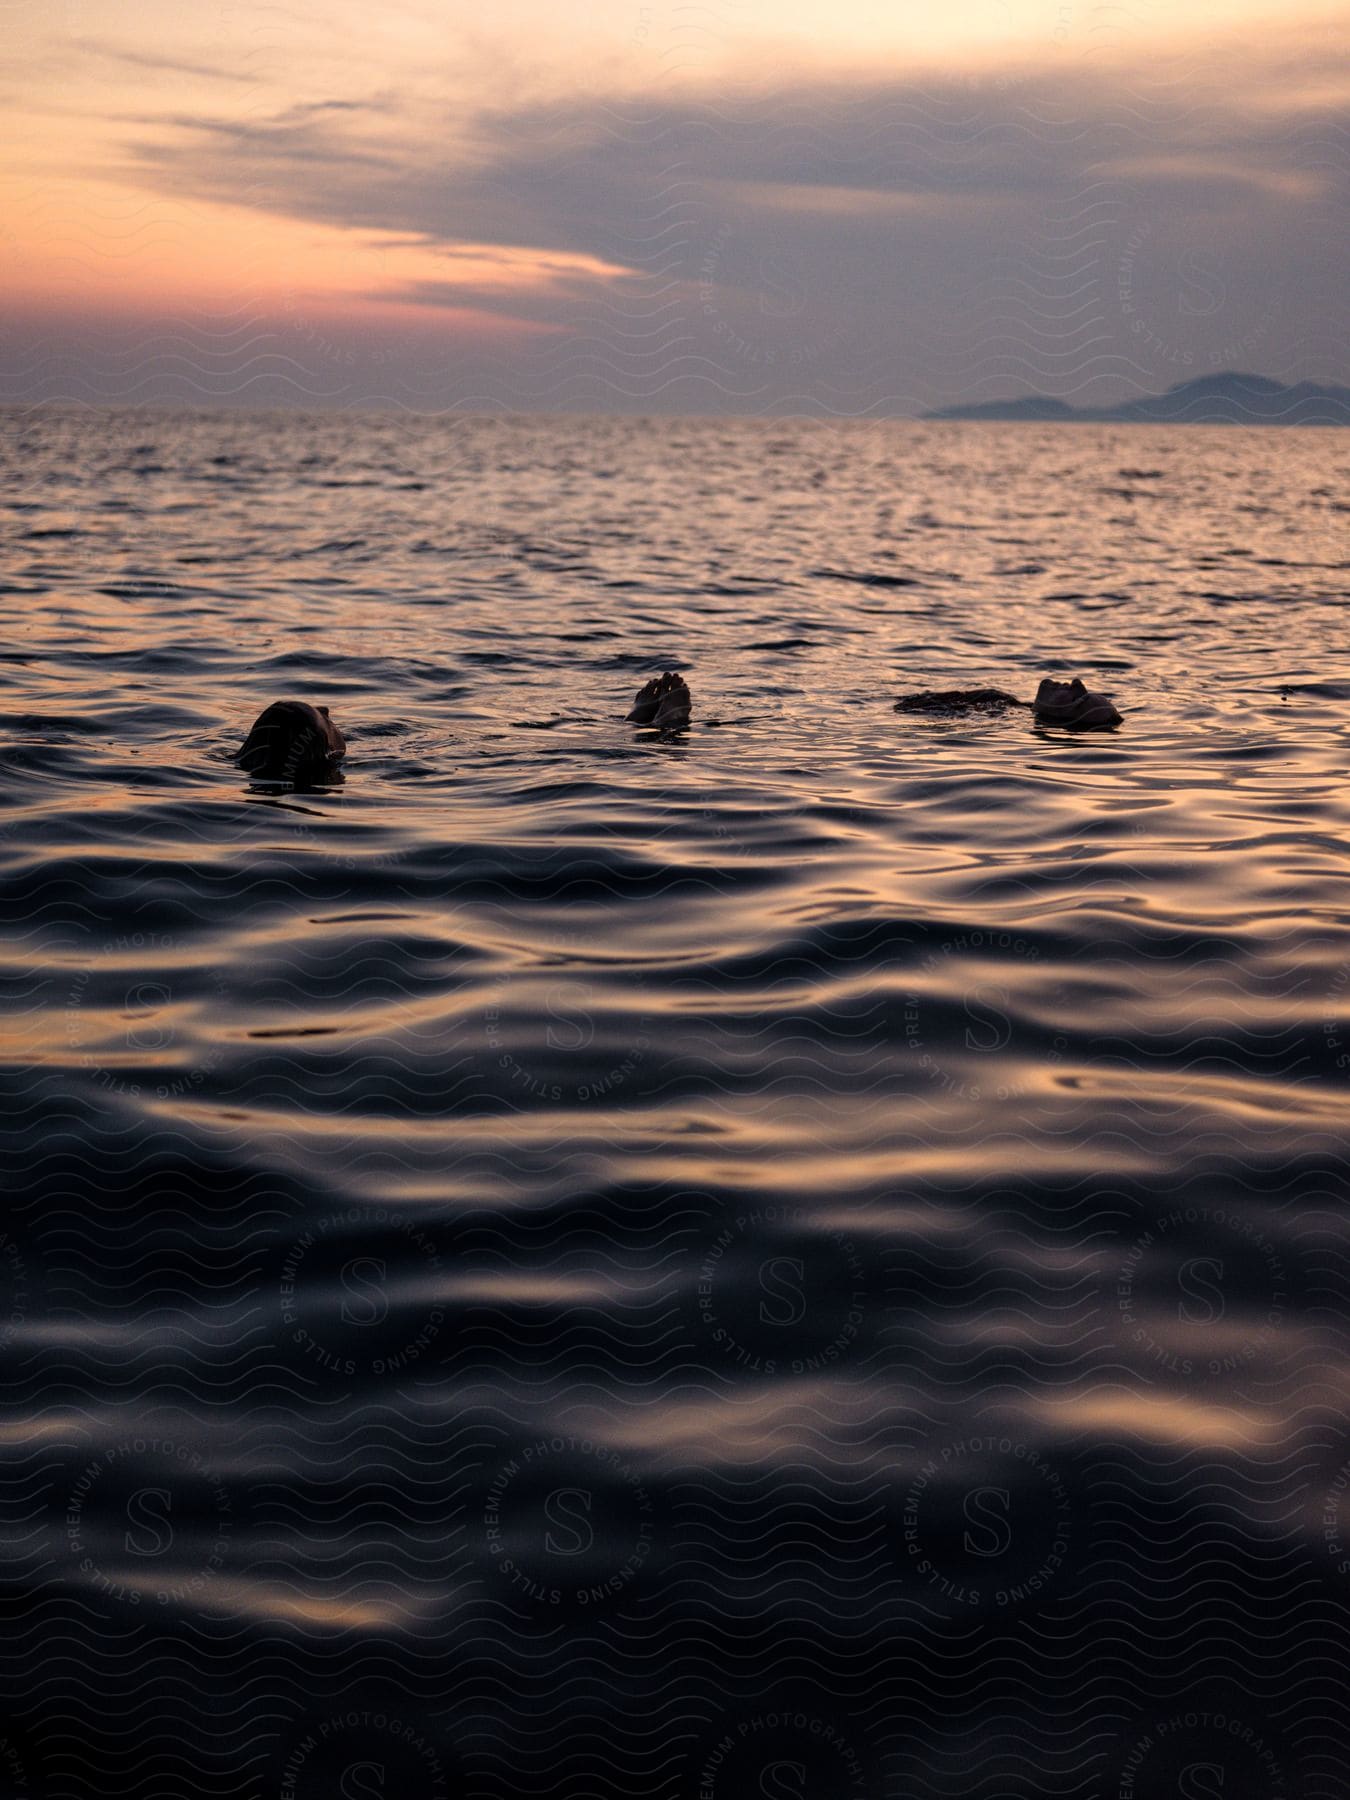 Two people swimming in an open sea at dusk with the sun setting over the horizon